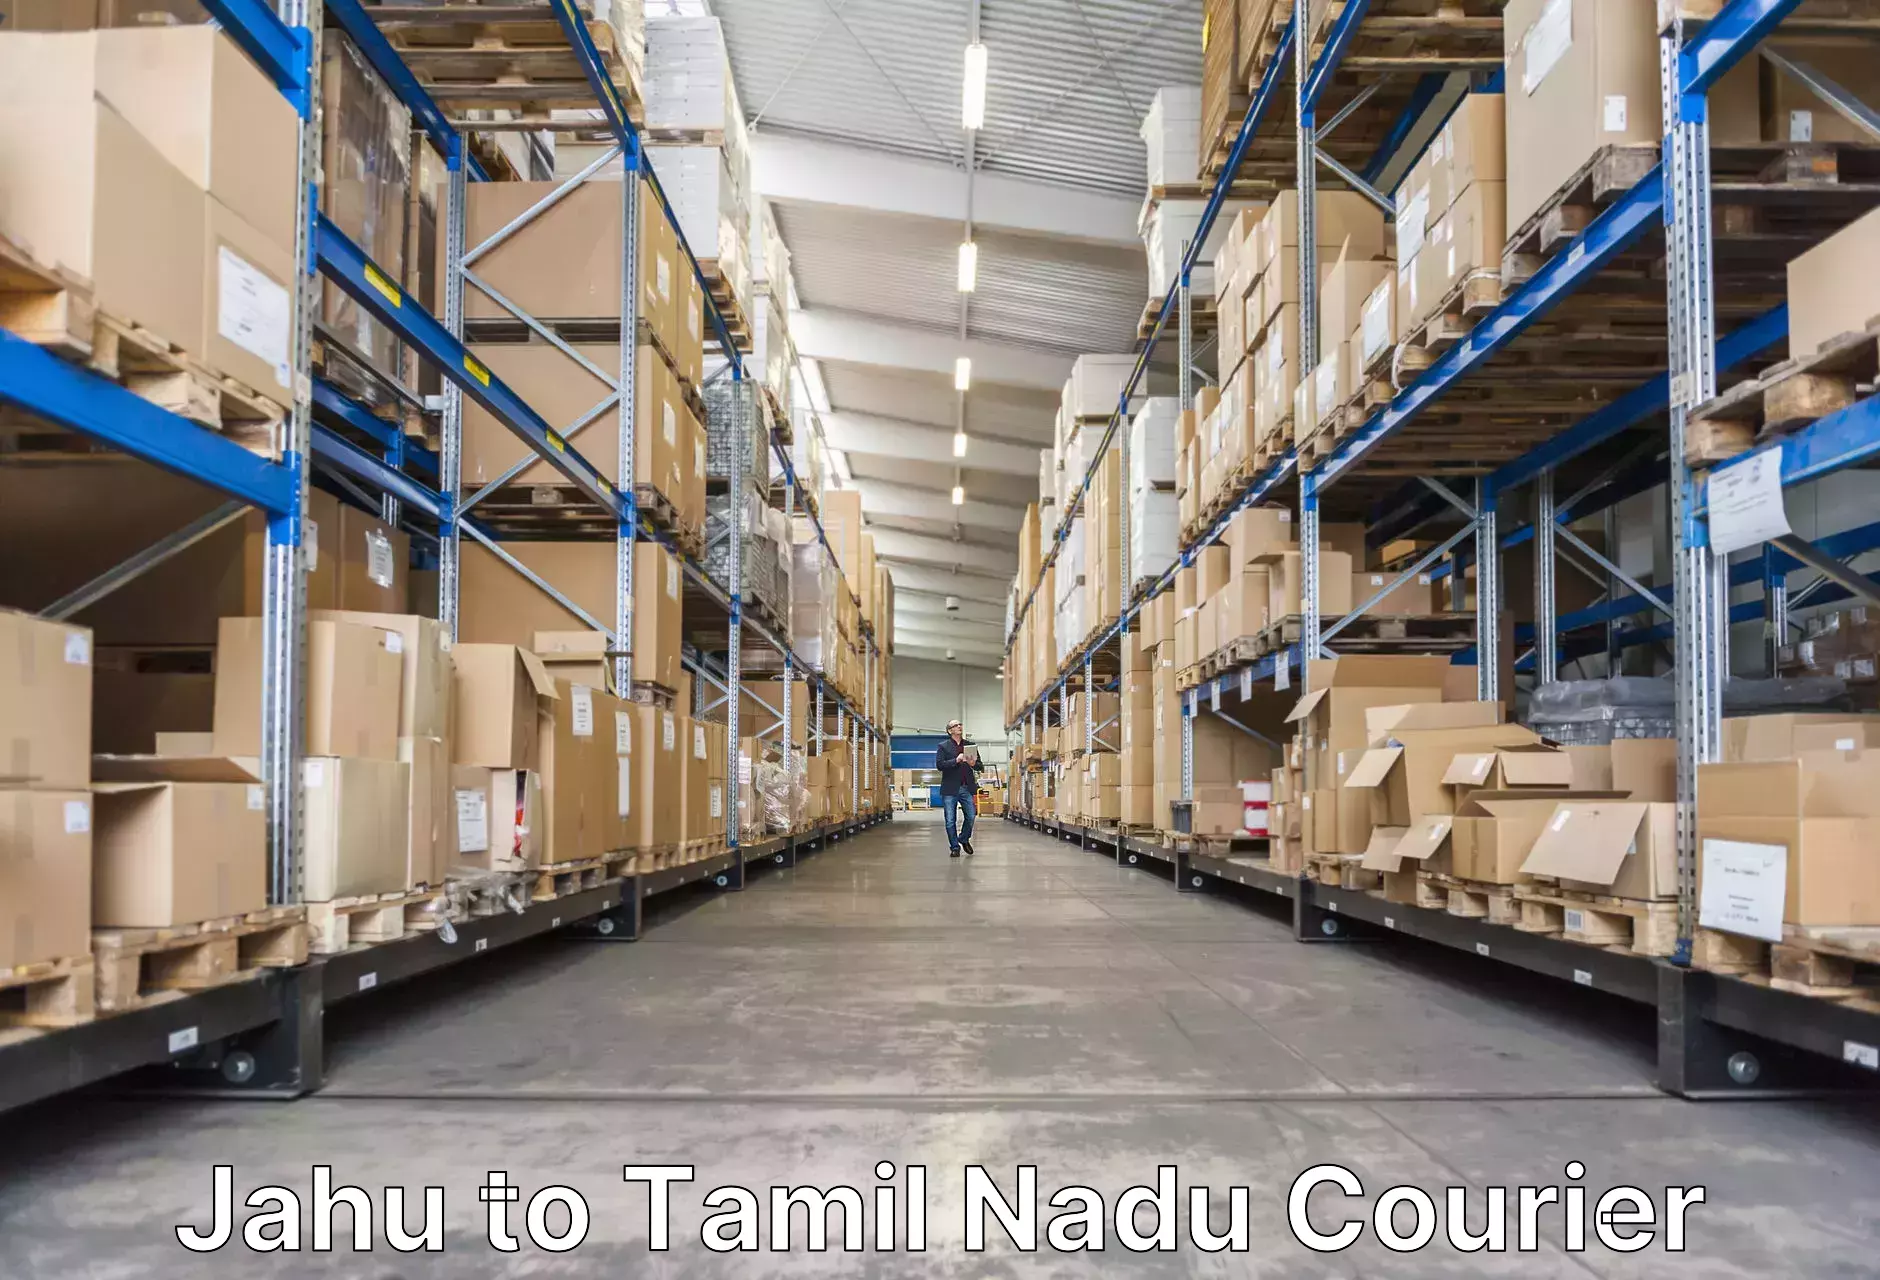 Luggage delivery system Jahu to Tamil Nadu